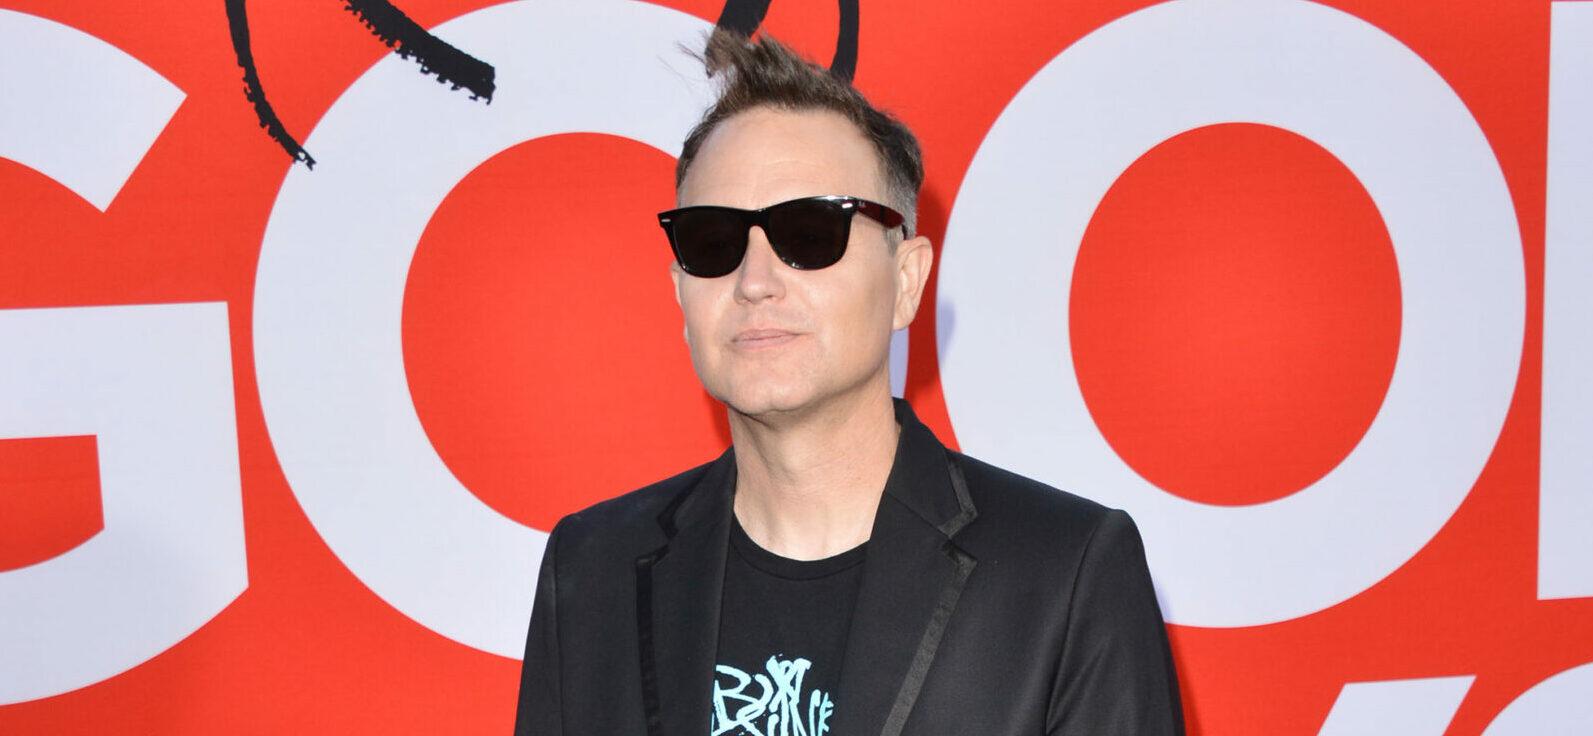 Mark Hoppus Had No Intention Of Sharing His Health Battle With The World